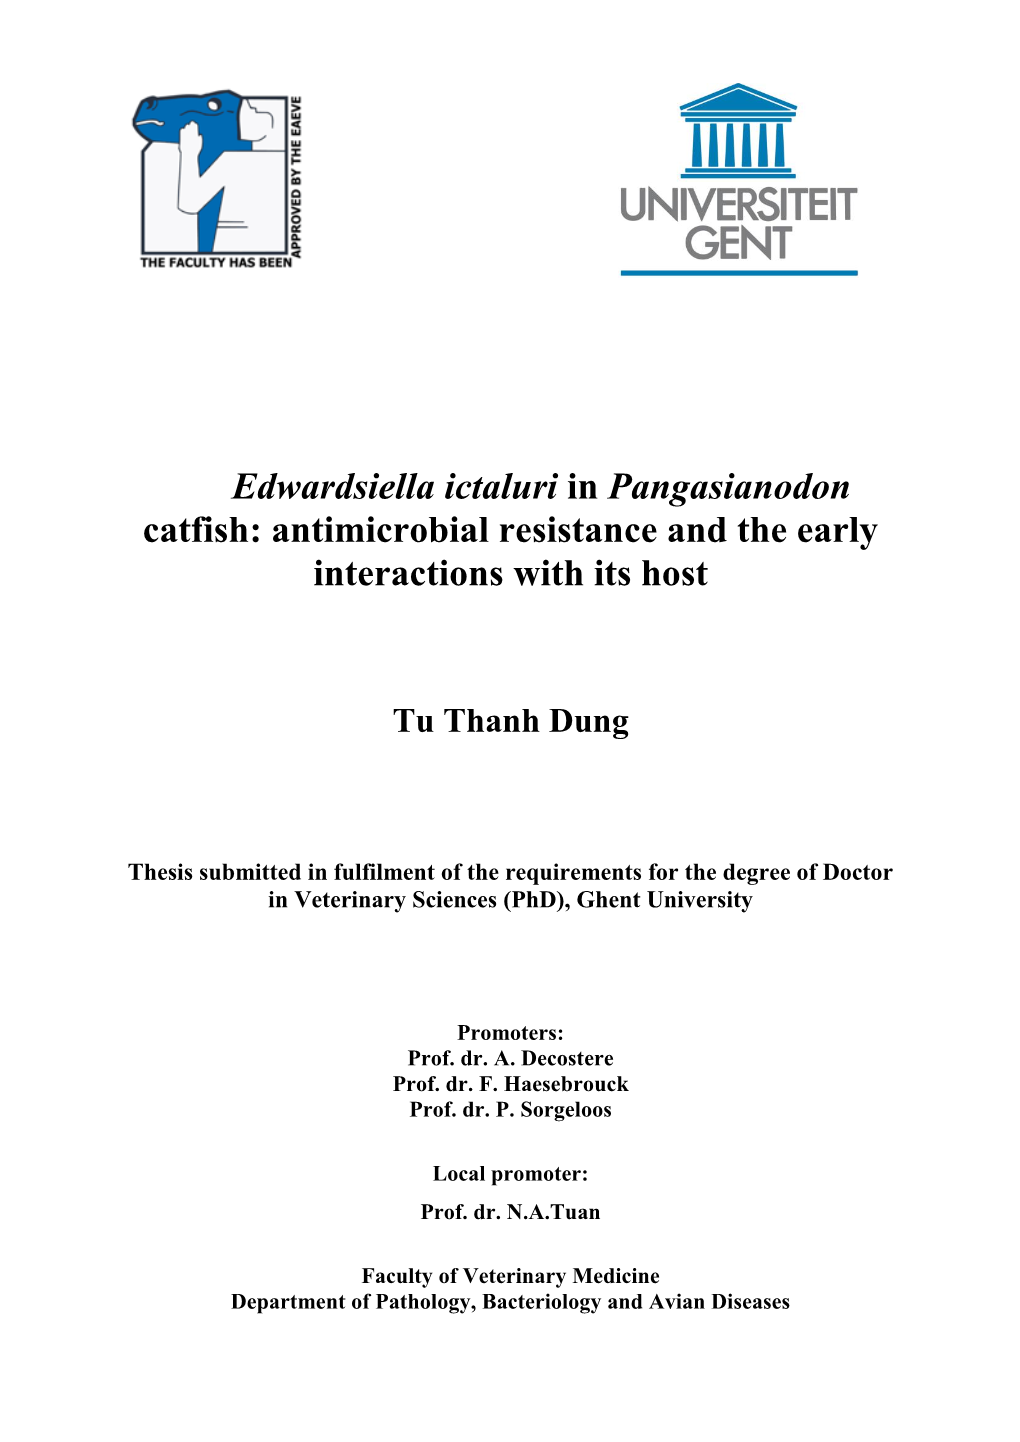 Edwardsiella Ictaluri in Pangasianodon Catfish: Antimicrobial Resistance and the Early Interactions with Its Host